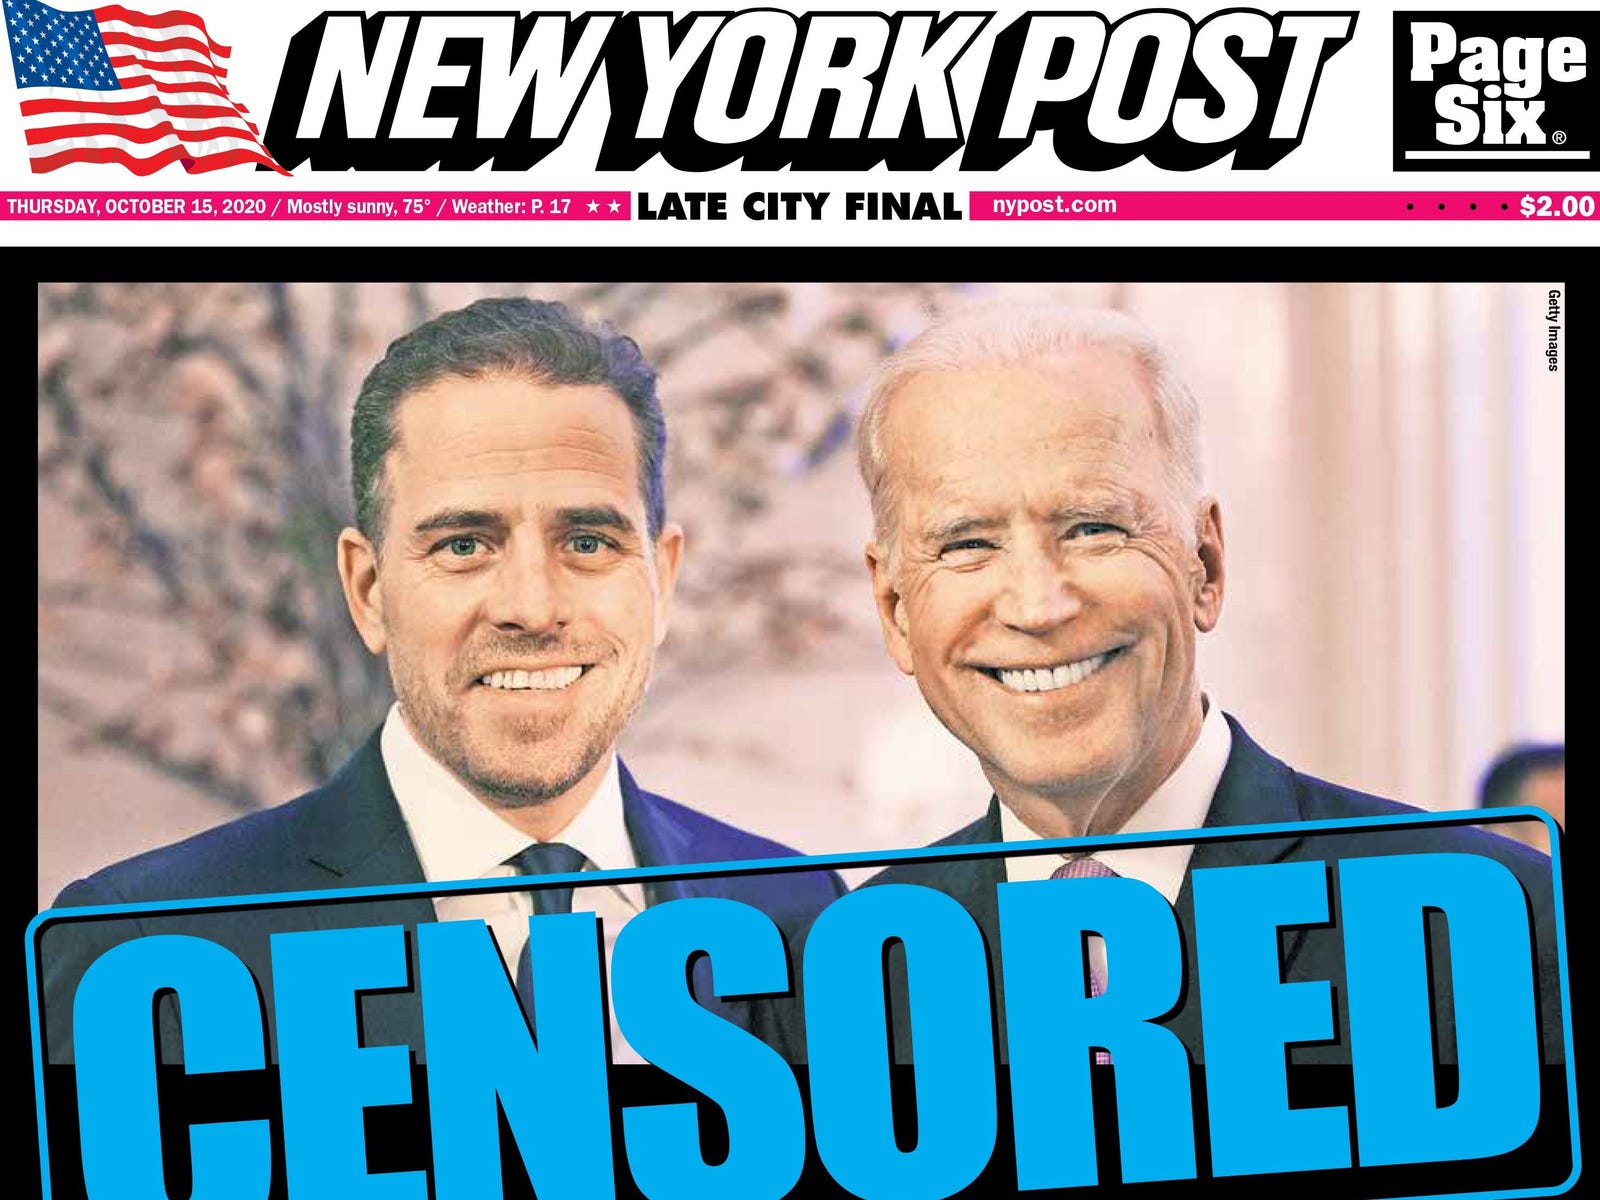 Twitter, Biden and the New York Post – Social Media Censorship Kicks up a Gear Major internet companies now claim the power to block any media they want on a totally ad hoc basis